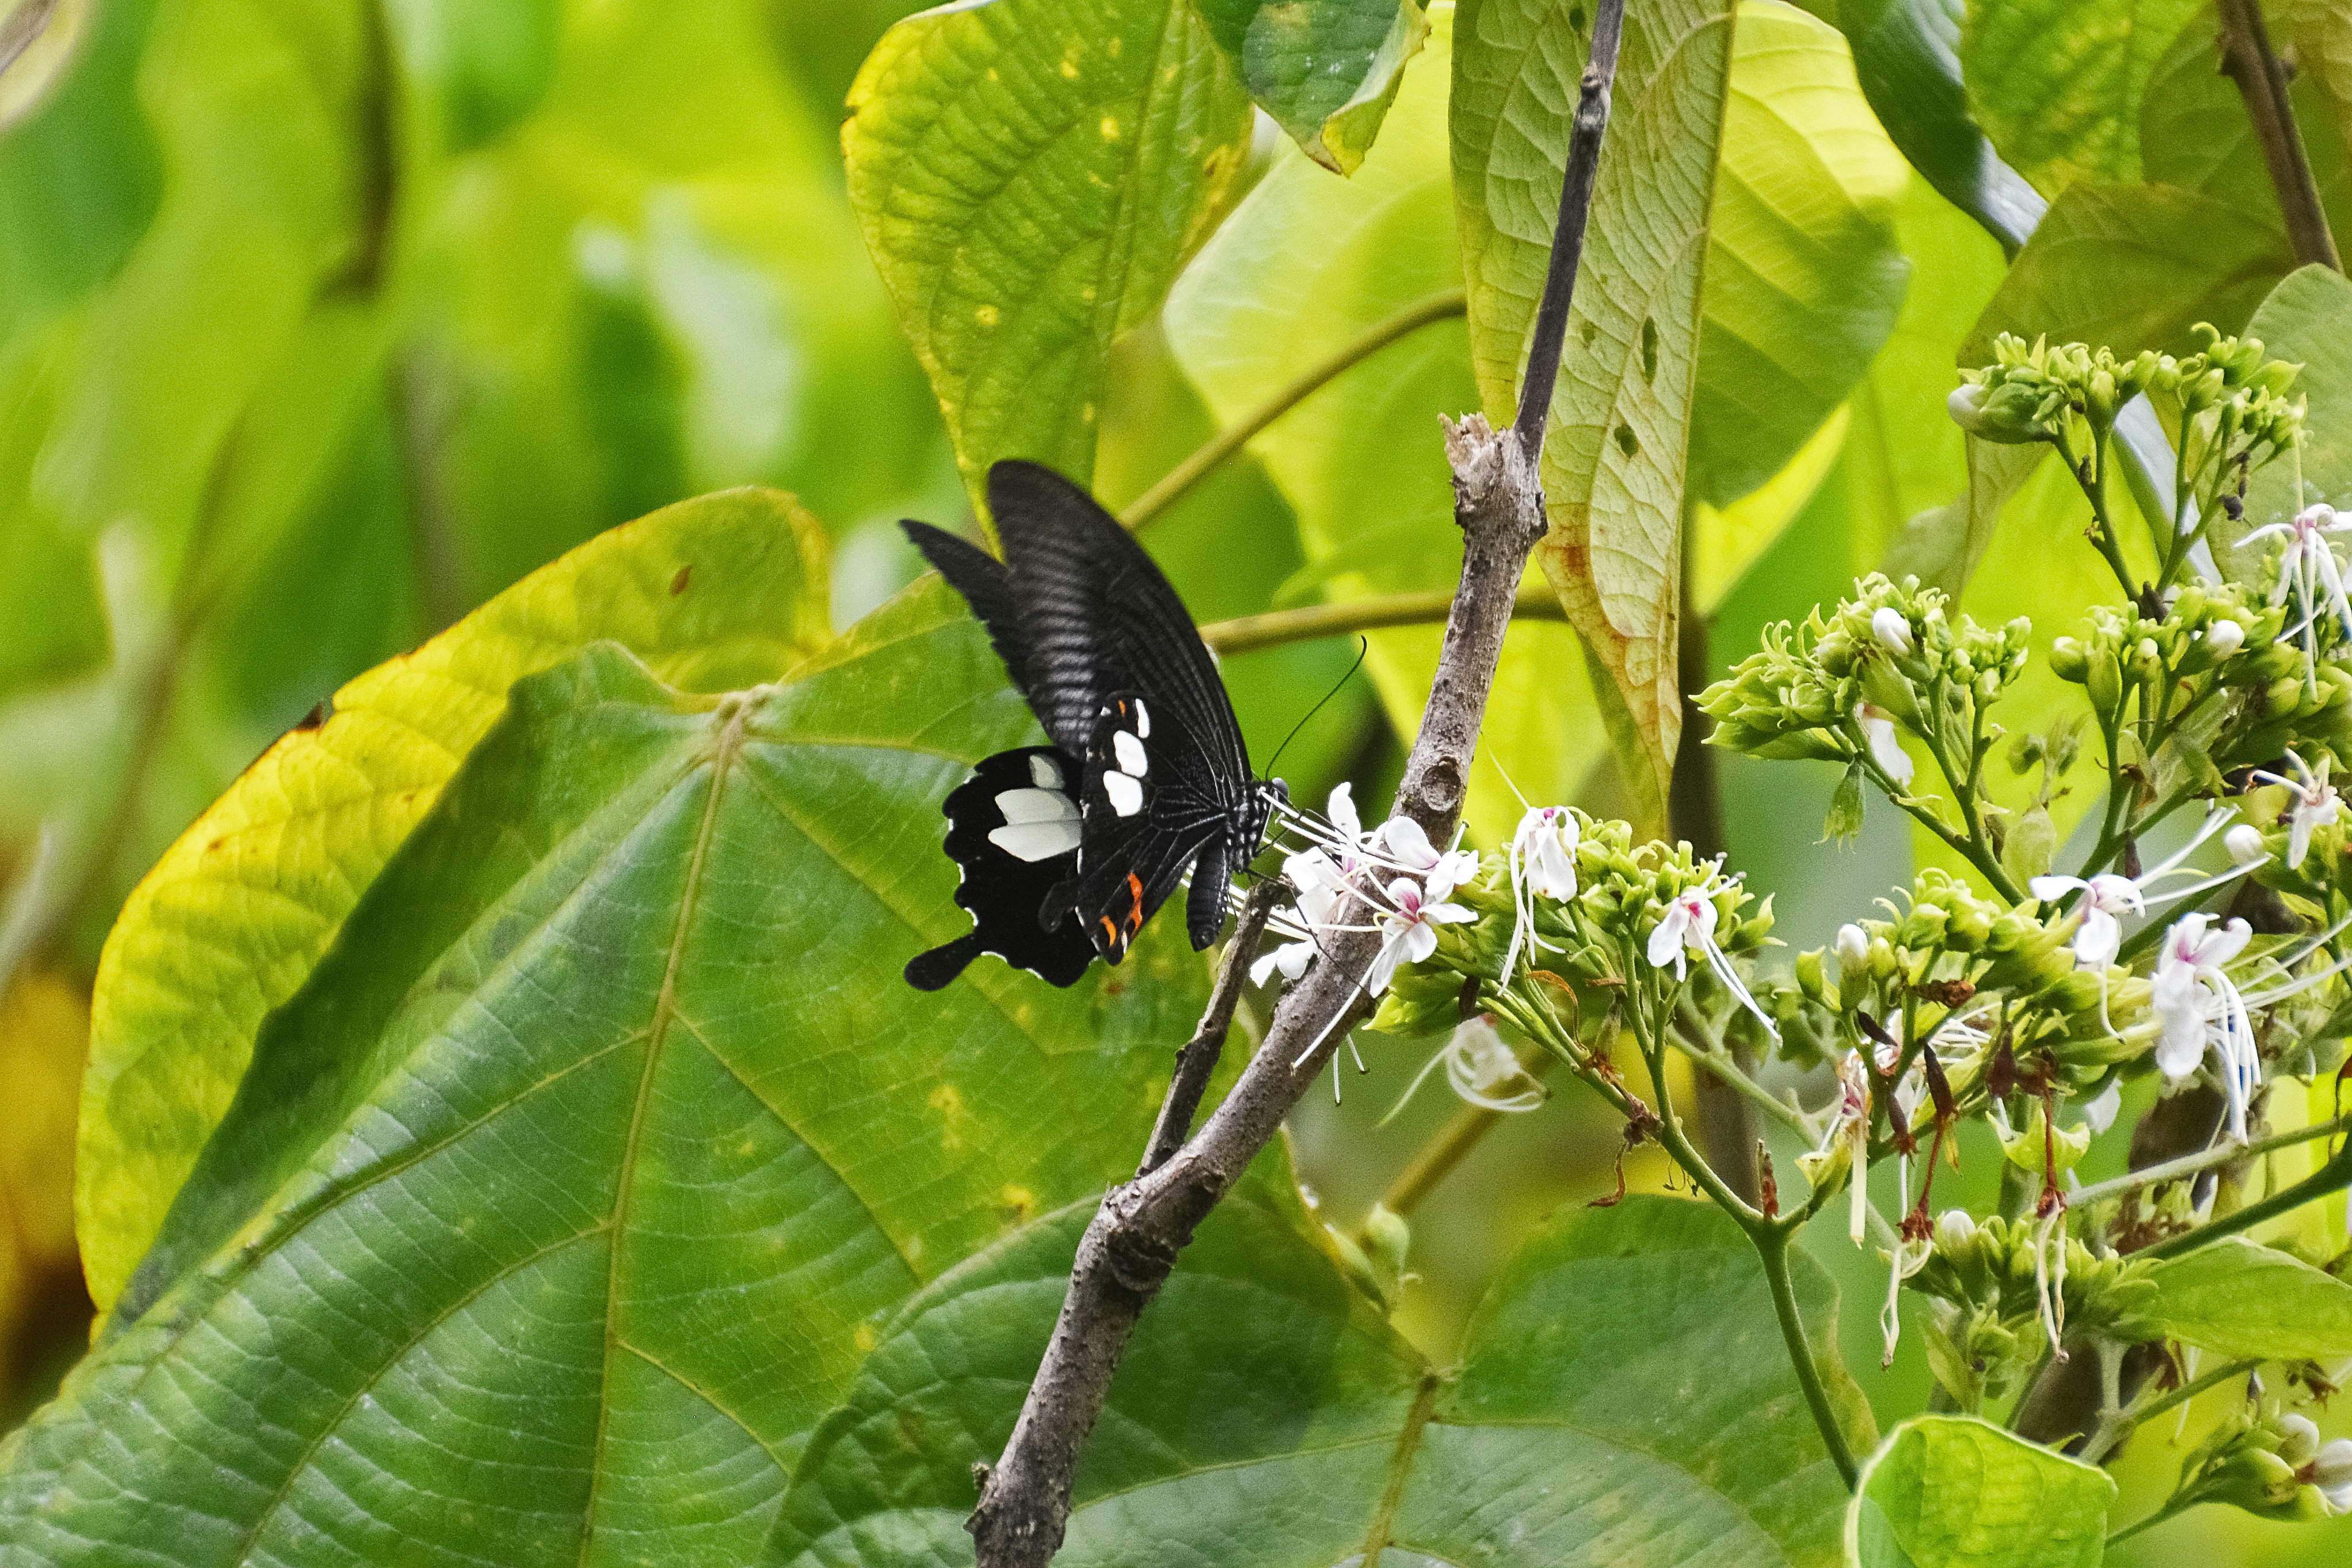 black and white butterfly perched on green leaf during daytime